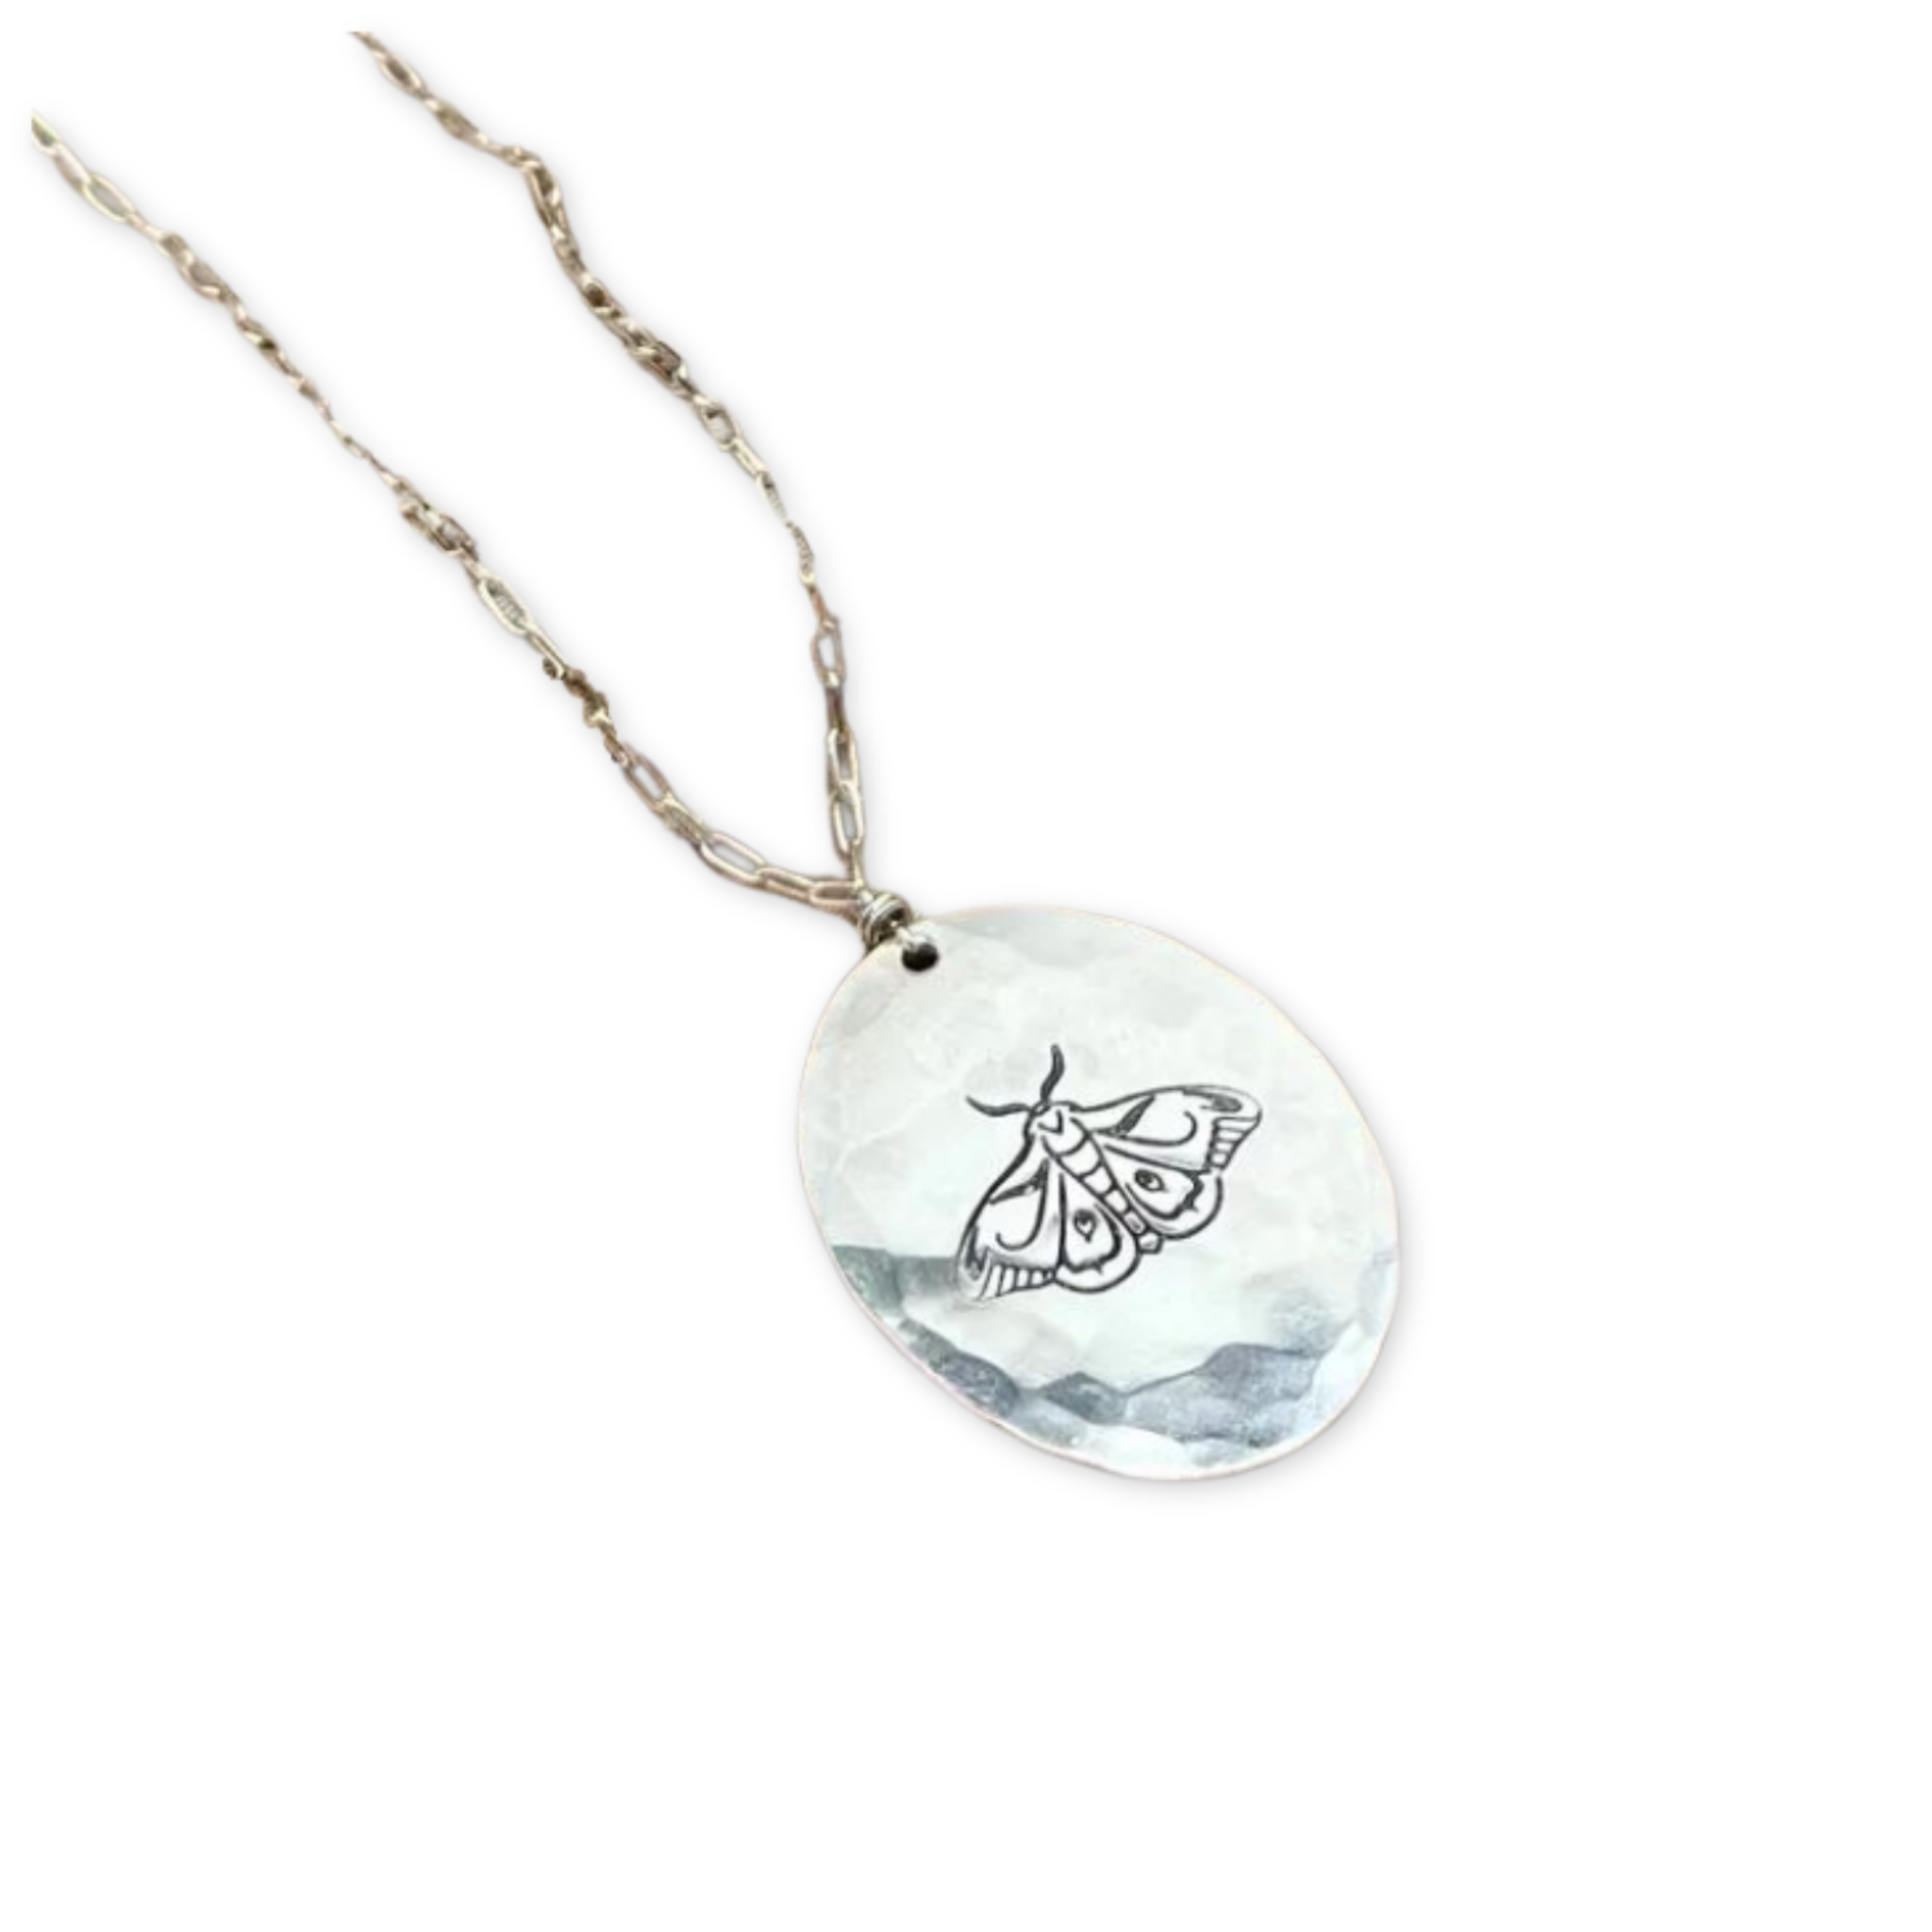 necklace with a hammered oval pendant with a stamped month on a chain